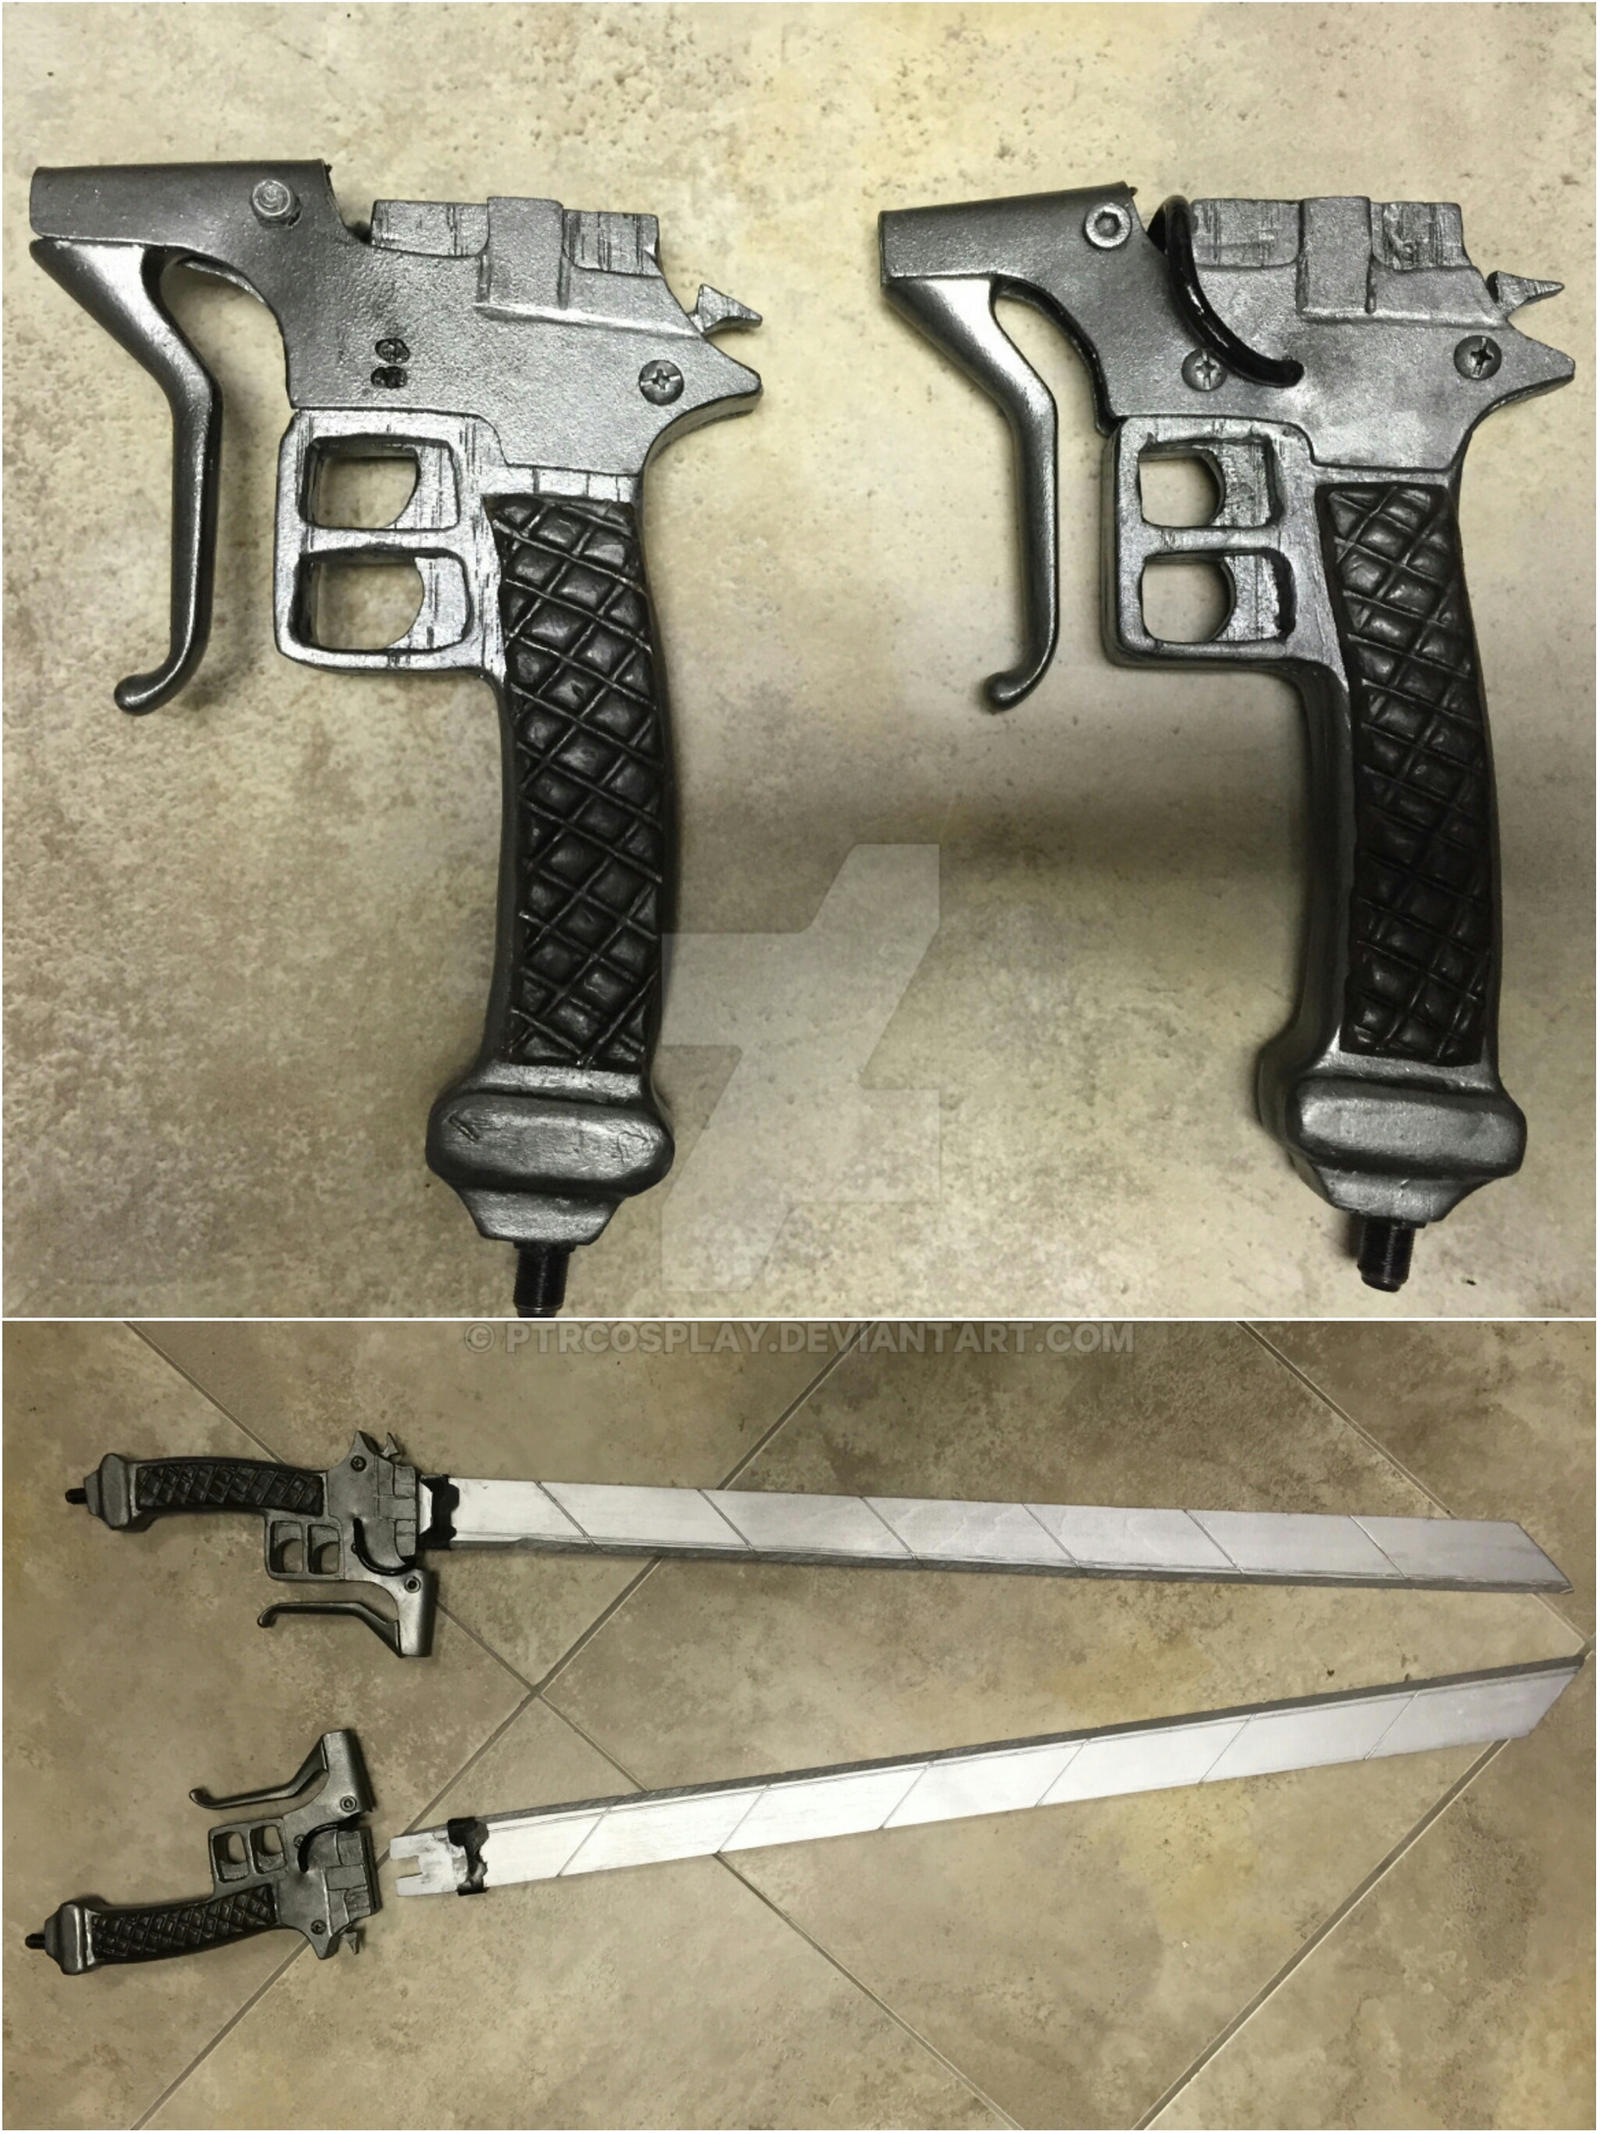 3D Maneuver Gear (Attack on Titan) -Blades/Handles by PtrCosplay on